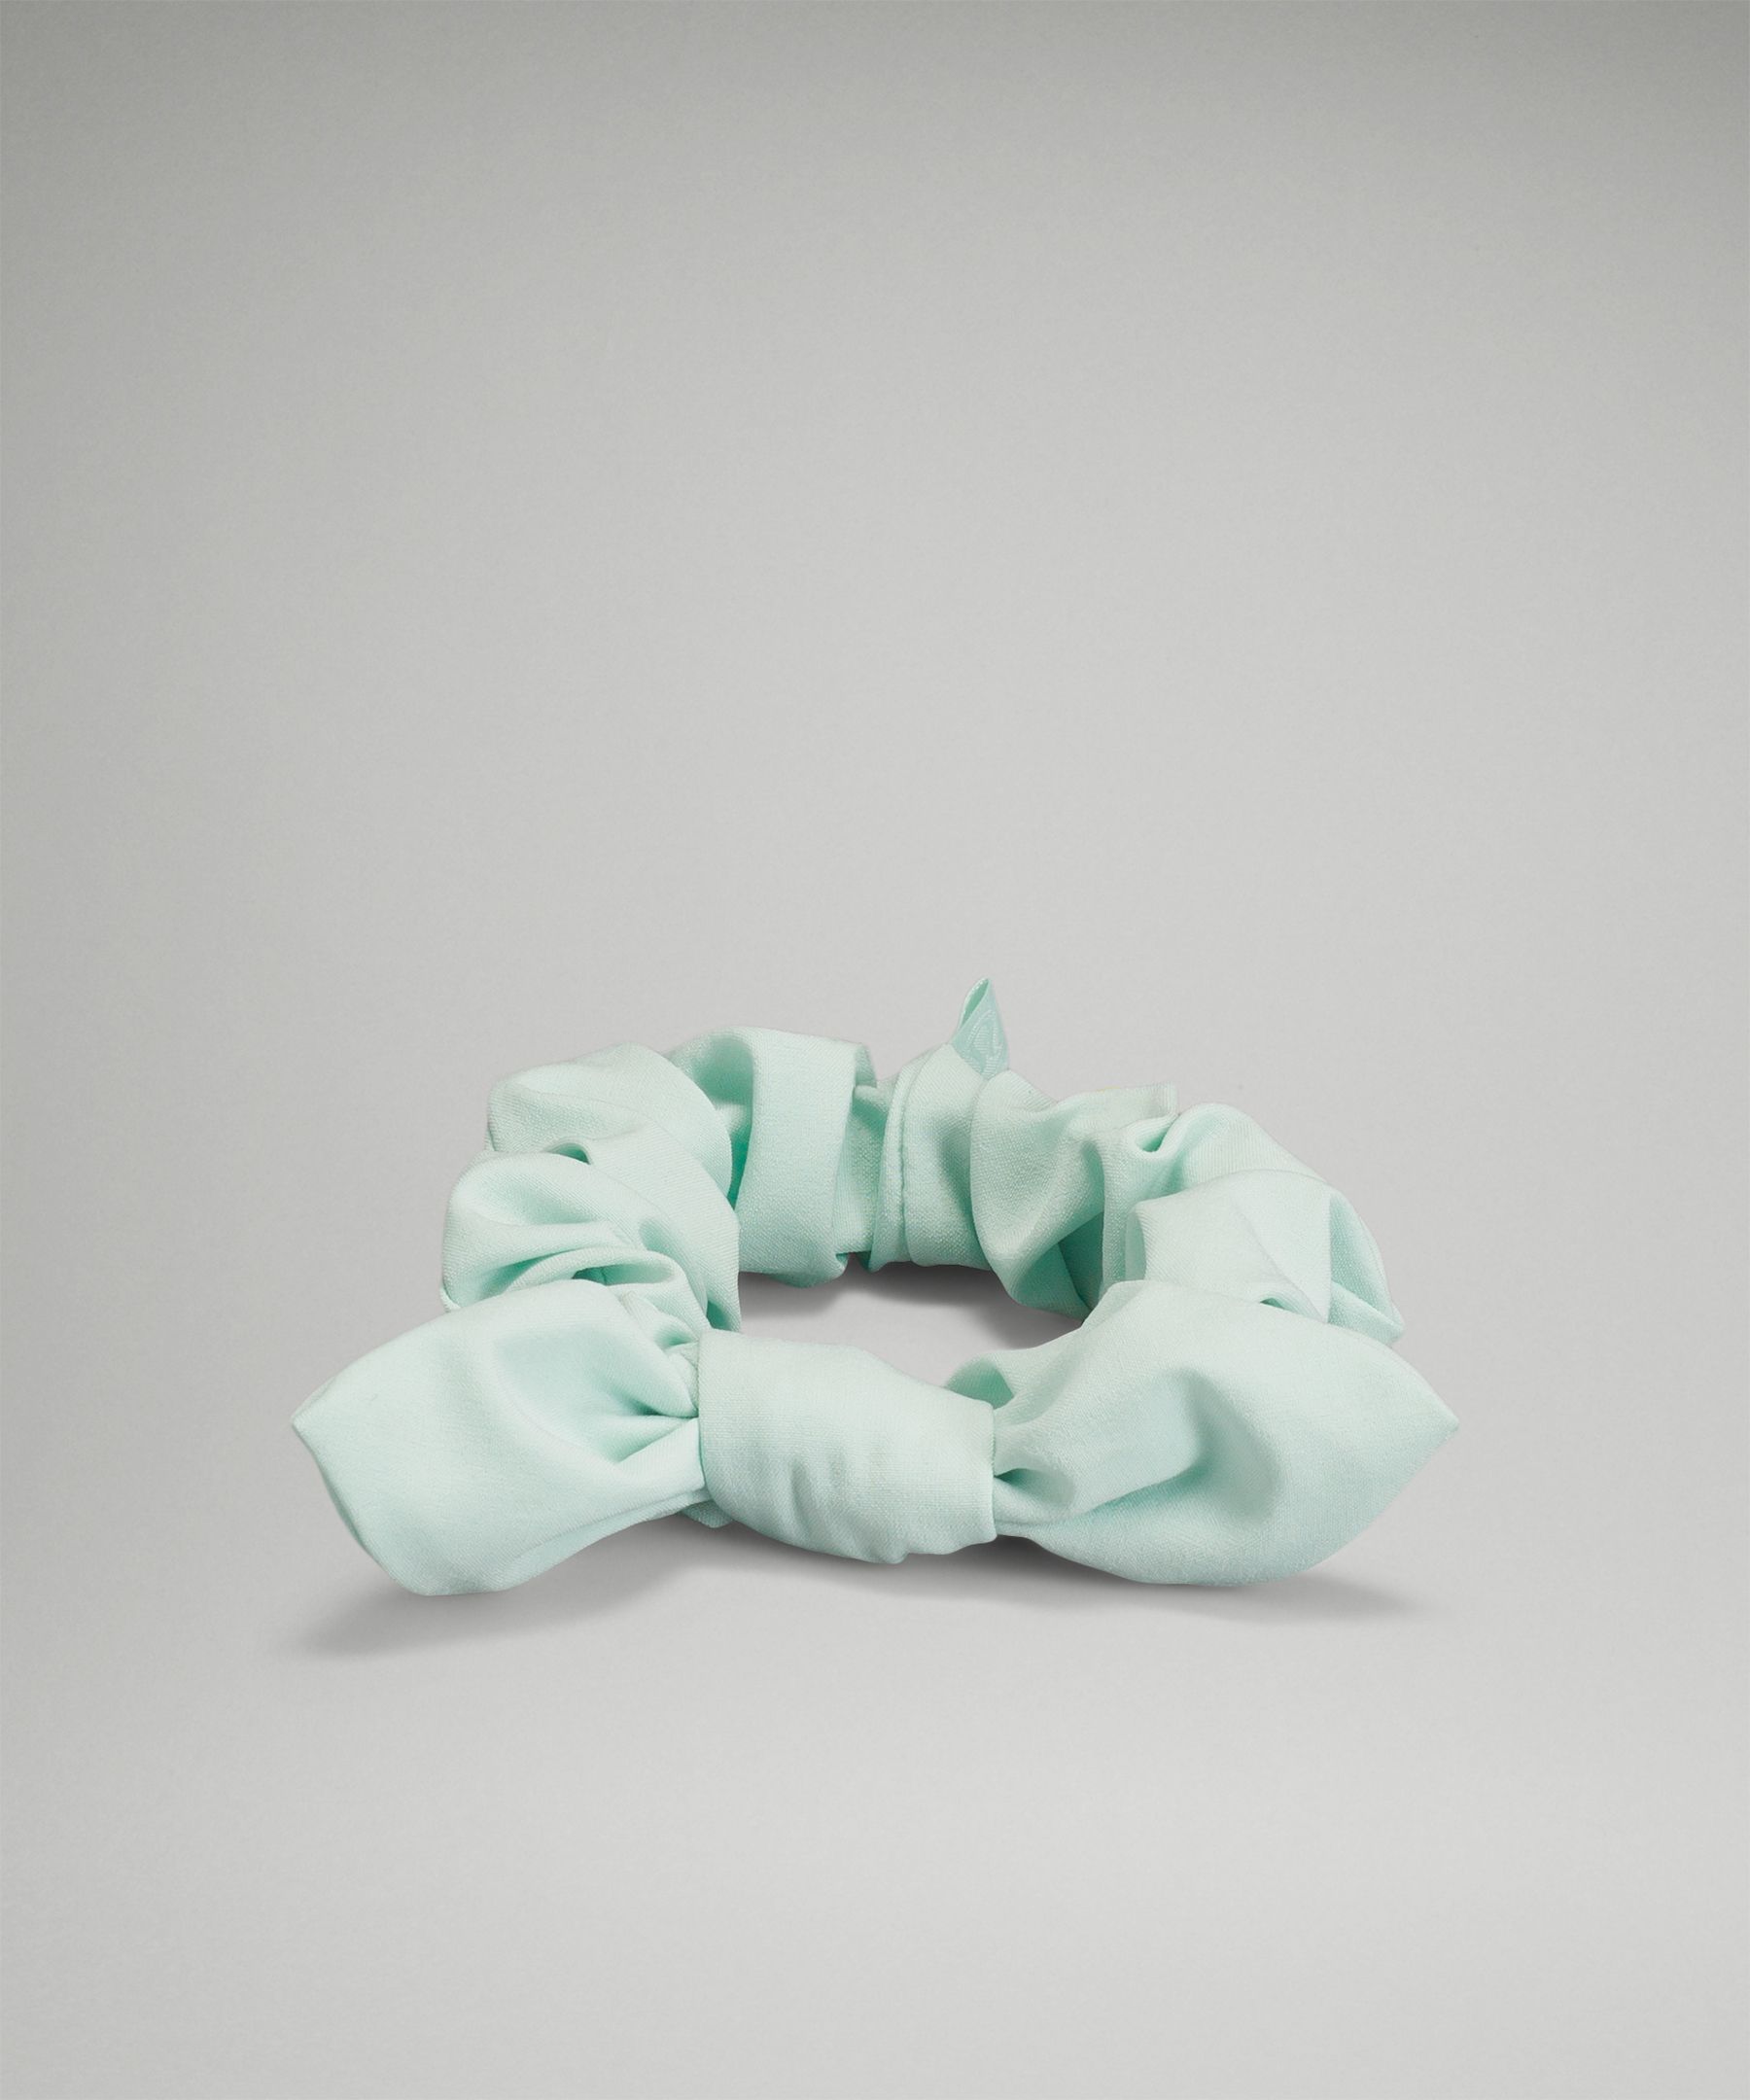 Lululemon Uplifting Scrunchie Bow In Delicate Mint